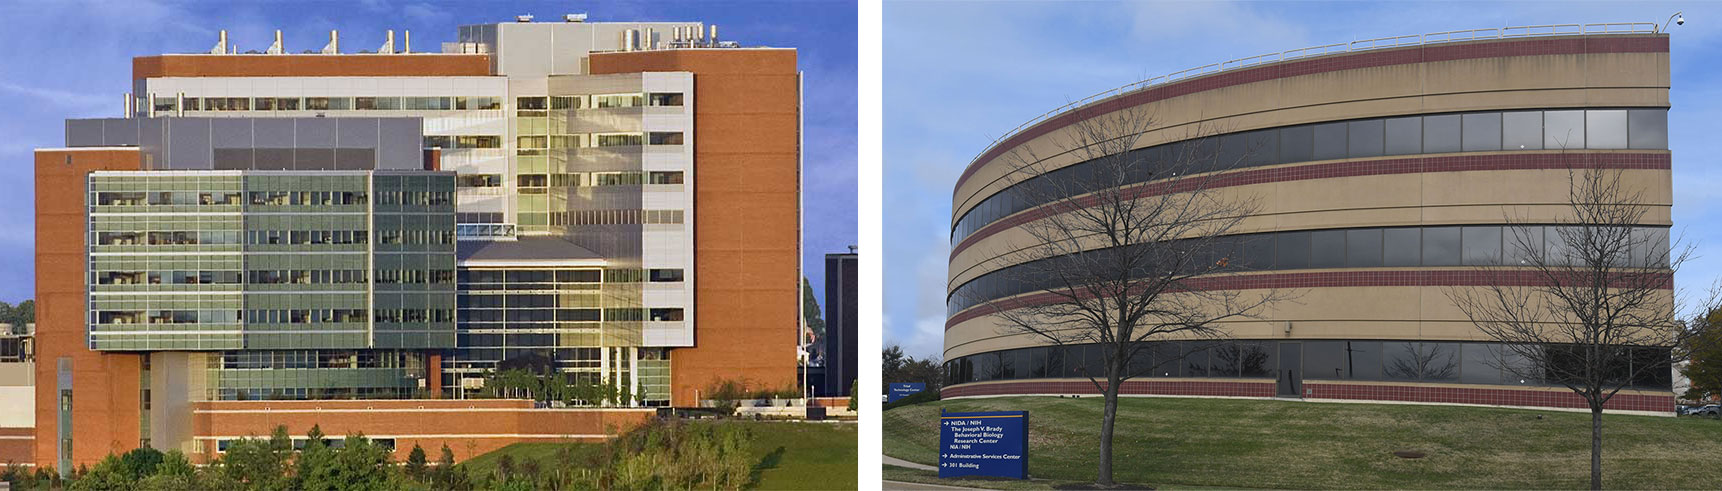 The NIDA IRP is located in the BiomedThe NIDA IRP is located in the Biomedical Research Center (left) and the Triad Technology Center (right).ical Research Center and the Triad Technology Center